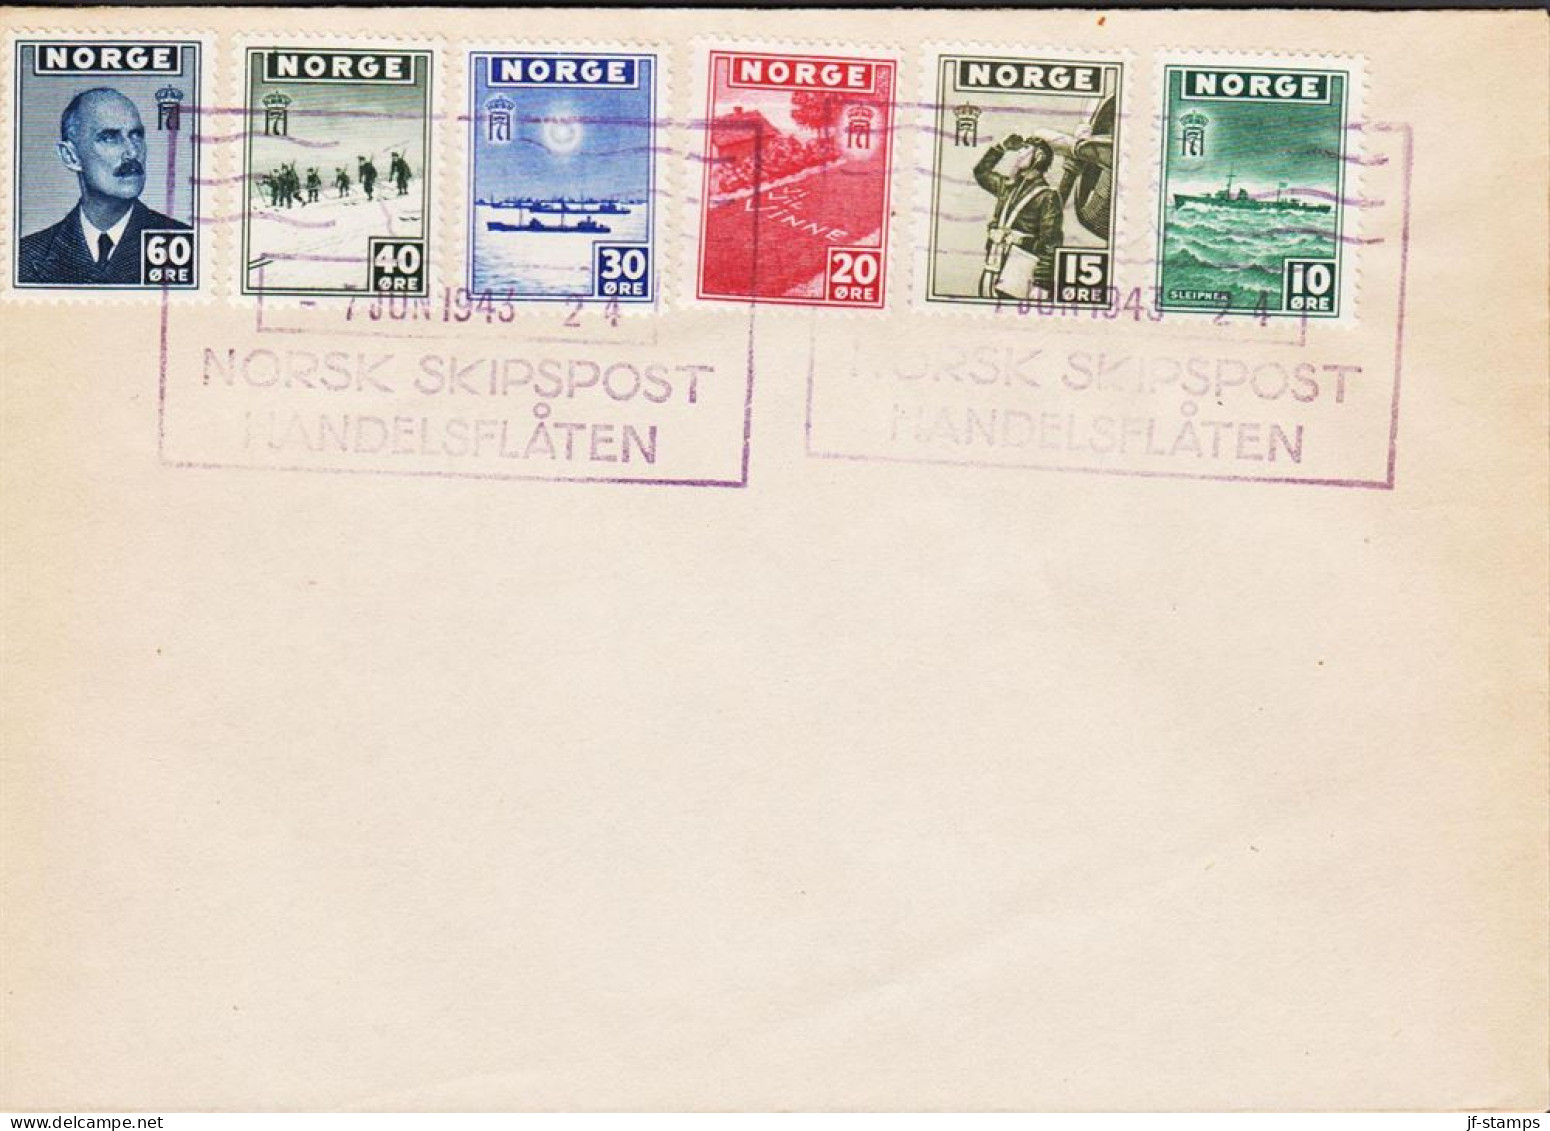 1943. NORGE. Fine Envelope With 10, 15, 20, 30 40 And 60 ØRE London Issue Cancelled With ... (Michel 278-283) - JF545678 - Brieven En Documenten